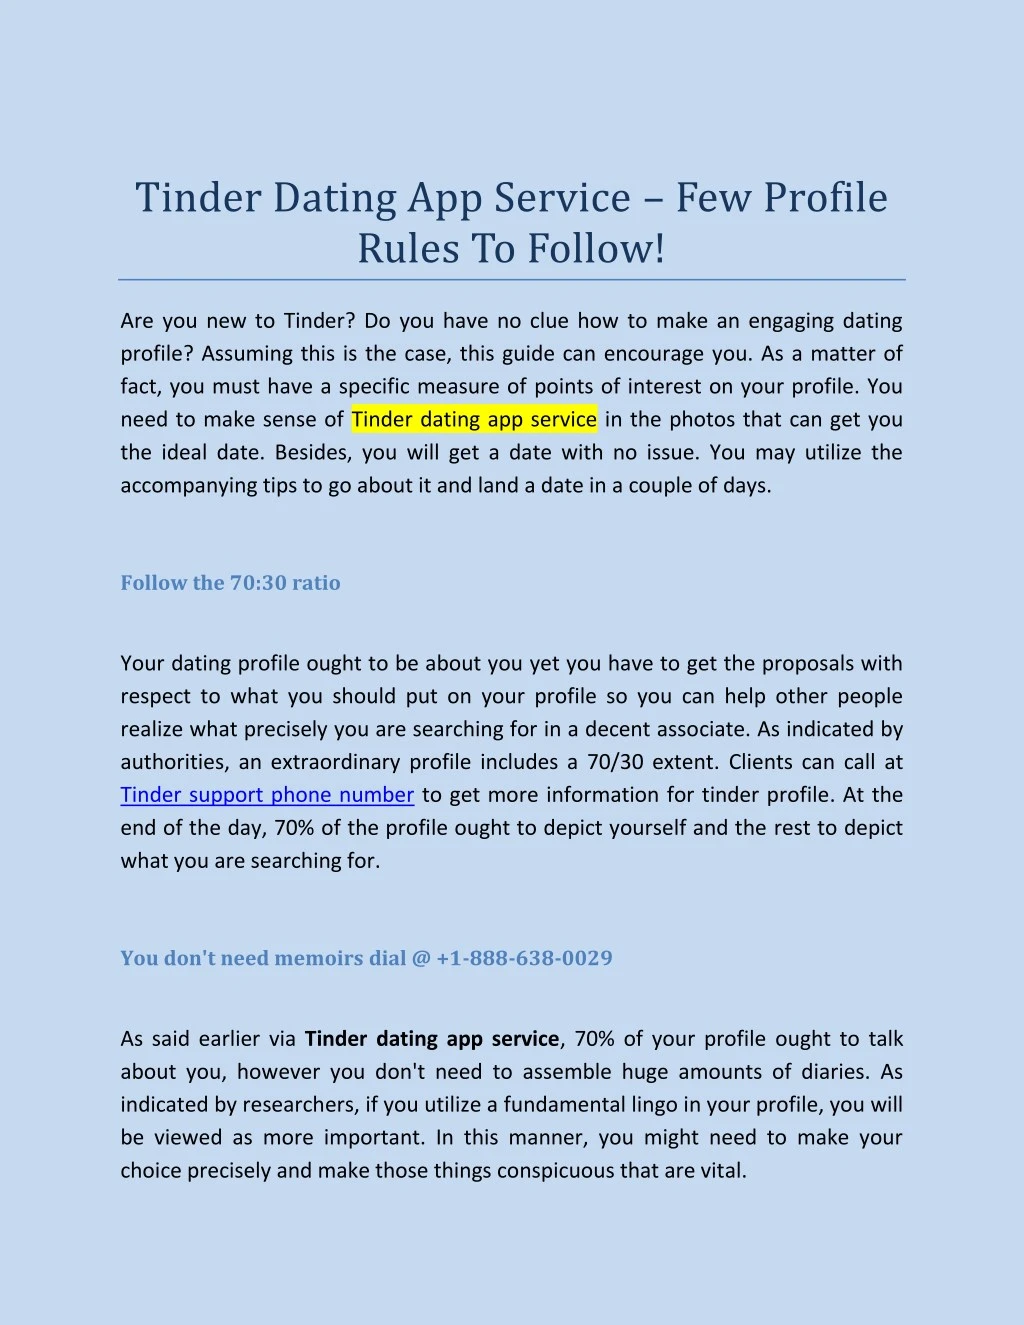 tinder dating app service few profile rules